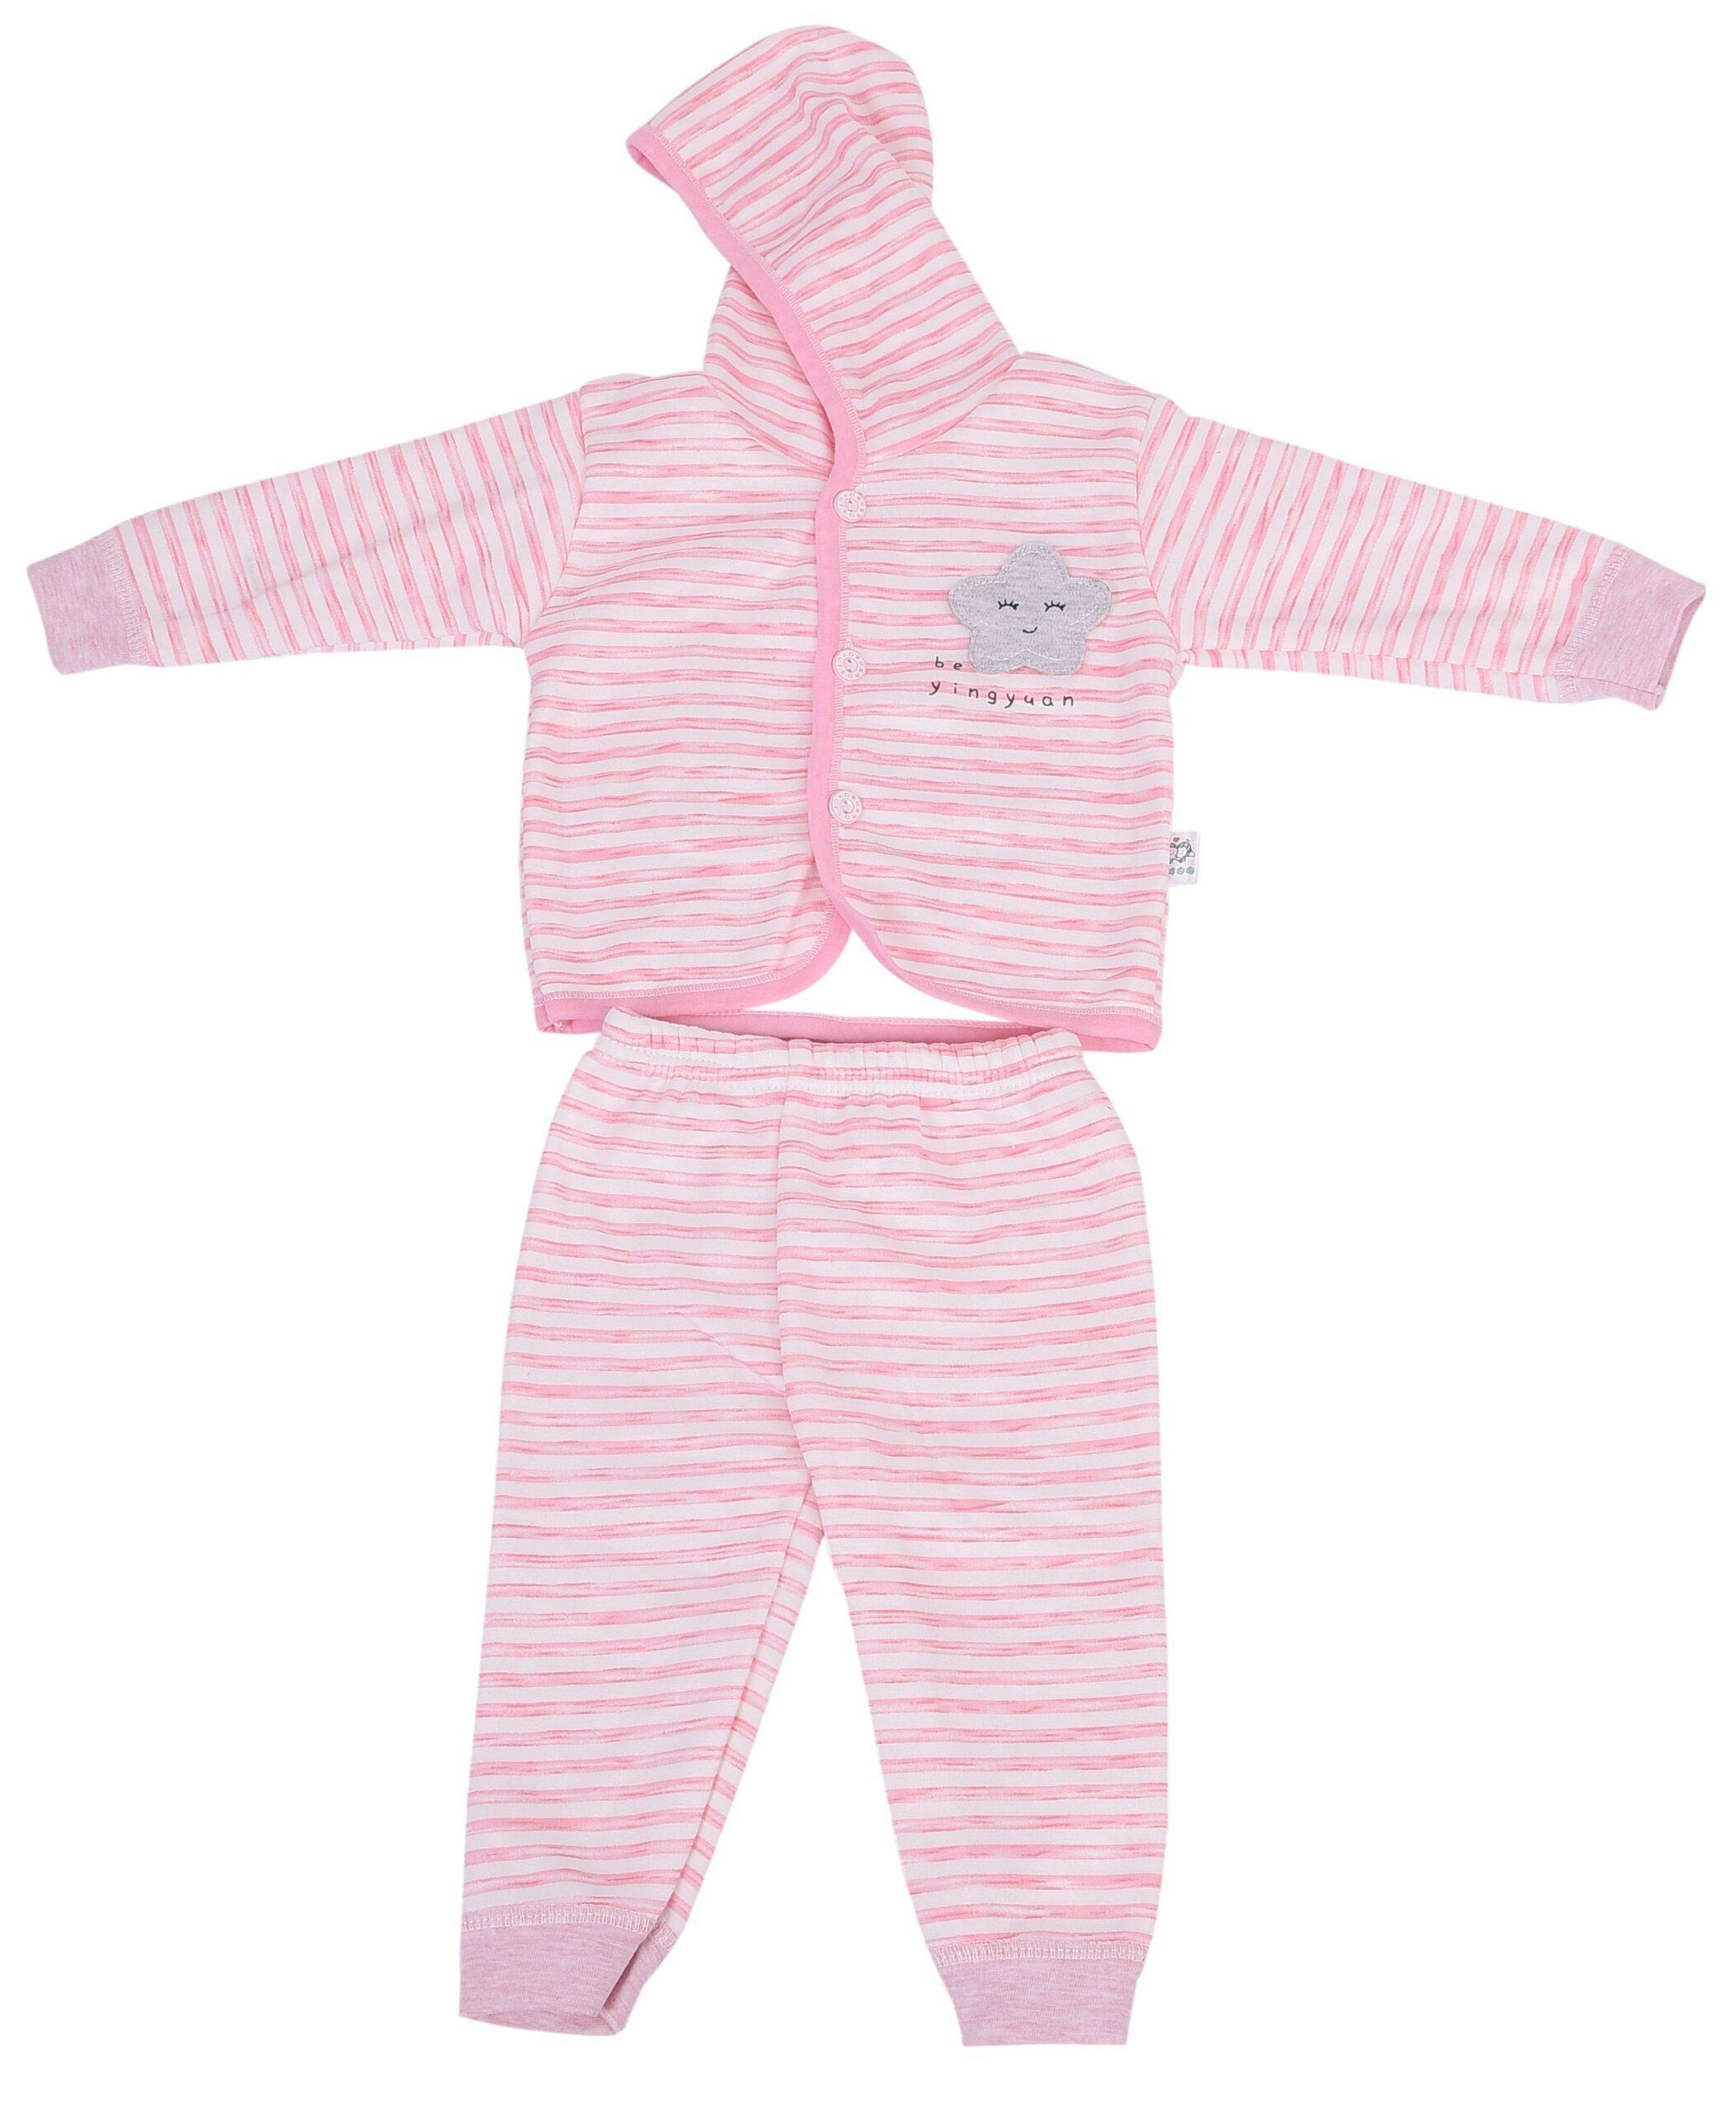 Baby's Warm Unisex Cotton Suit Set - 1Pajama and 1Hooded Shirt- Pink Strip